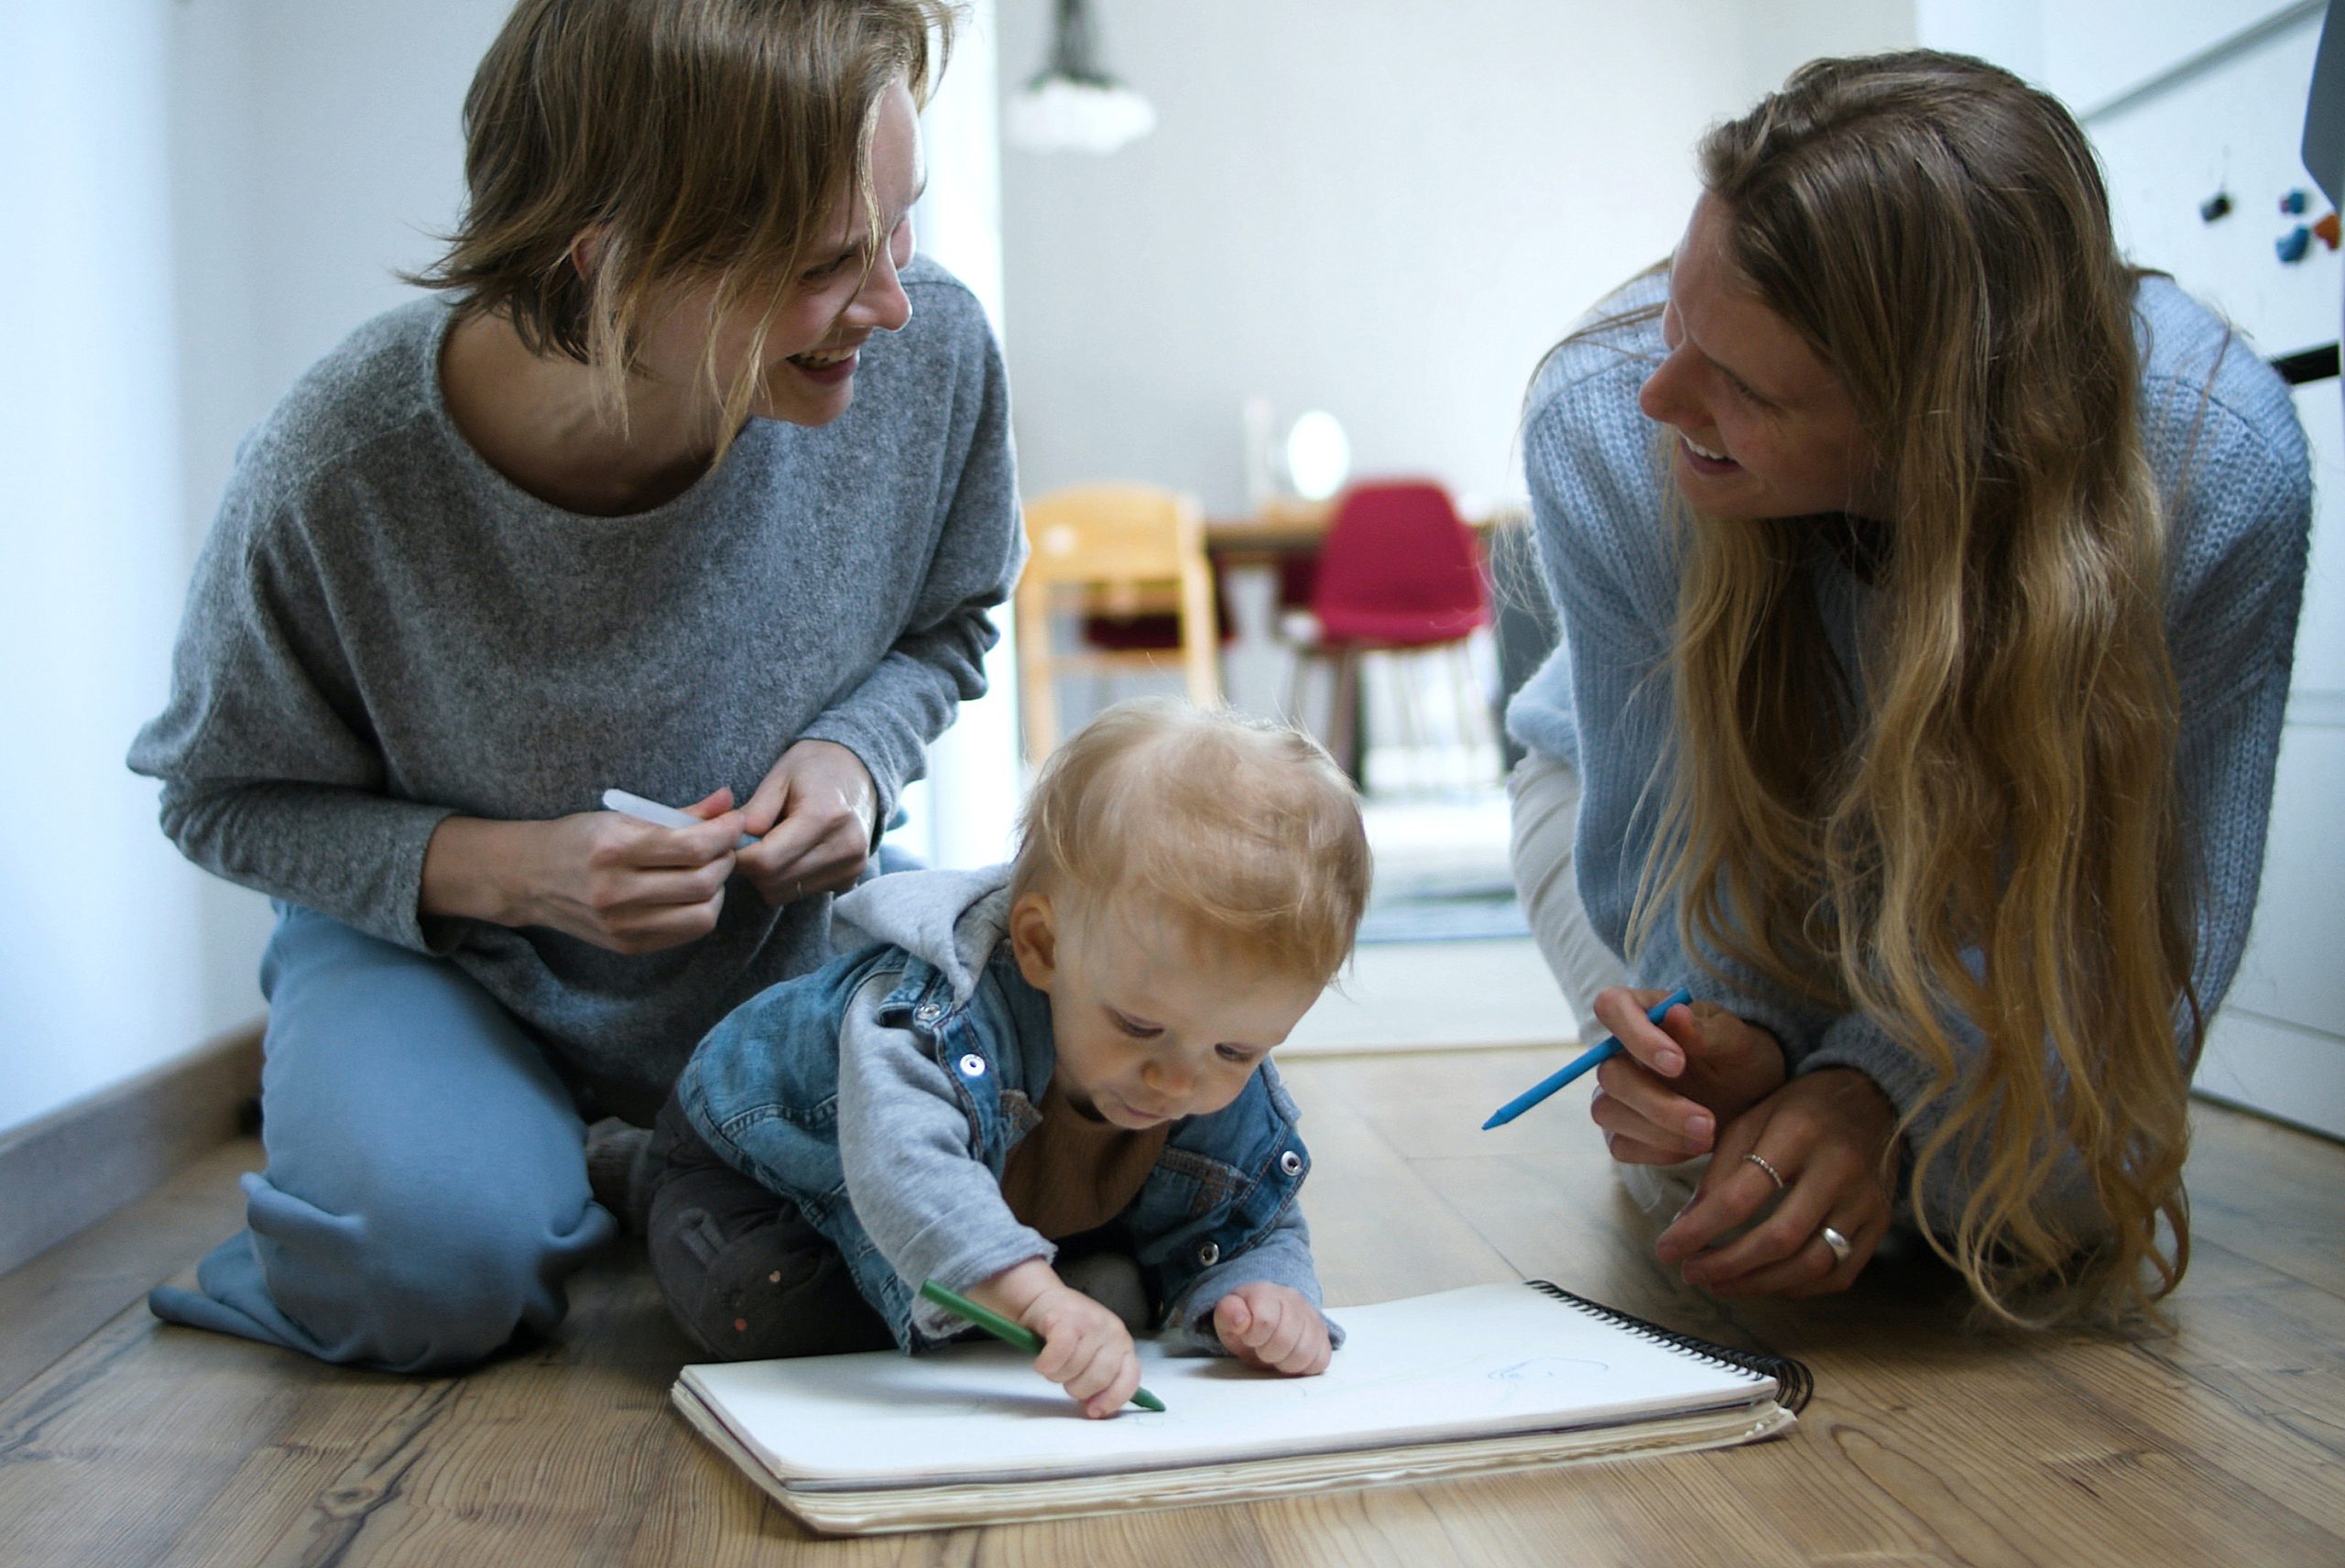 Two women kneel on the floor and smile at each other while a toddler draws on paper with a crayon